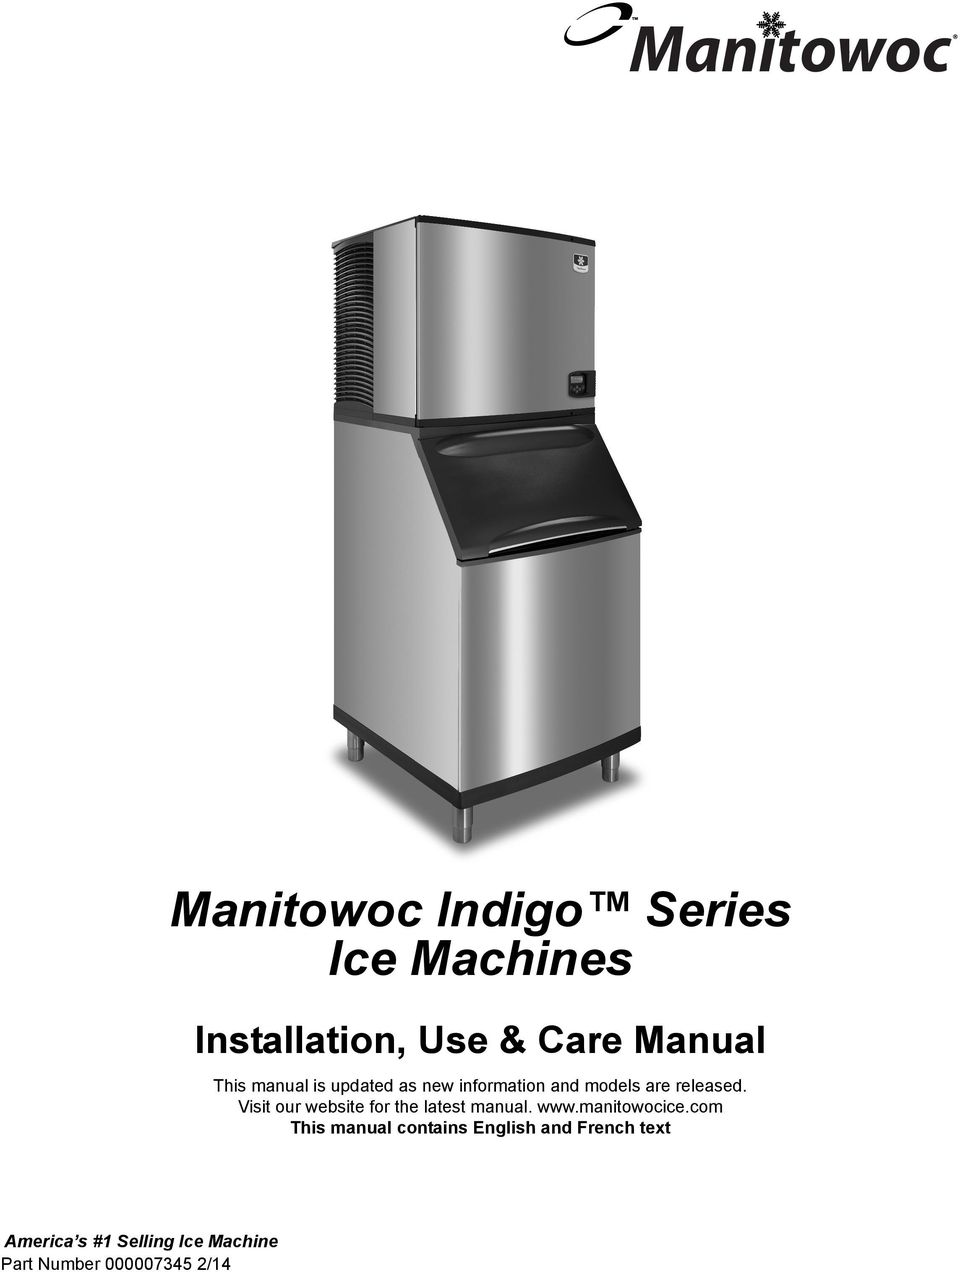 Visit our website for the latest manual. www.manitowocice.